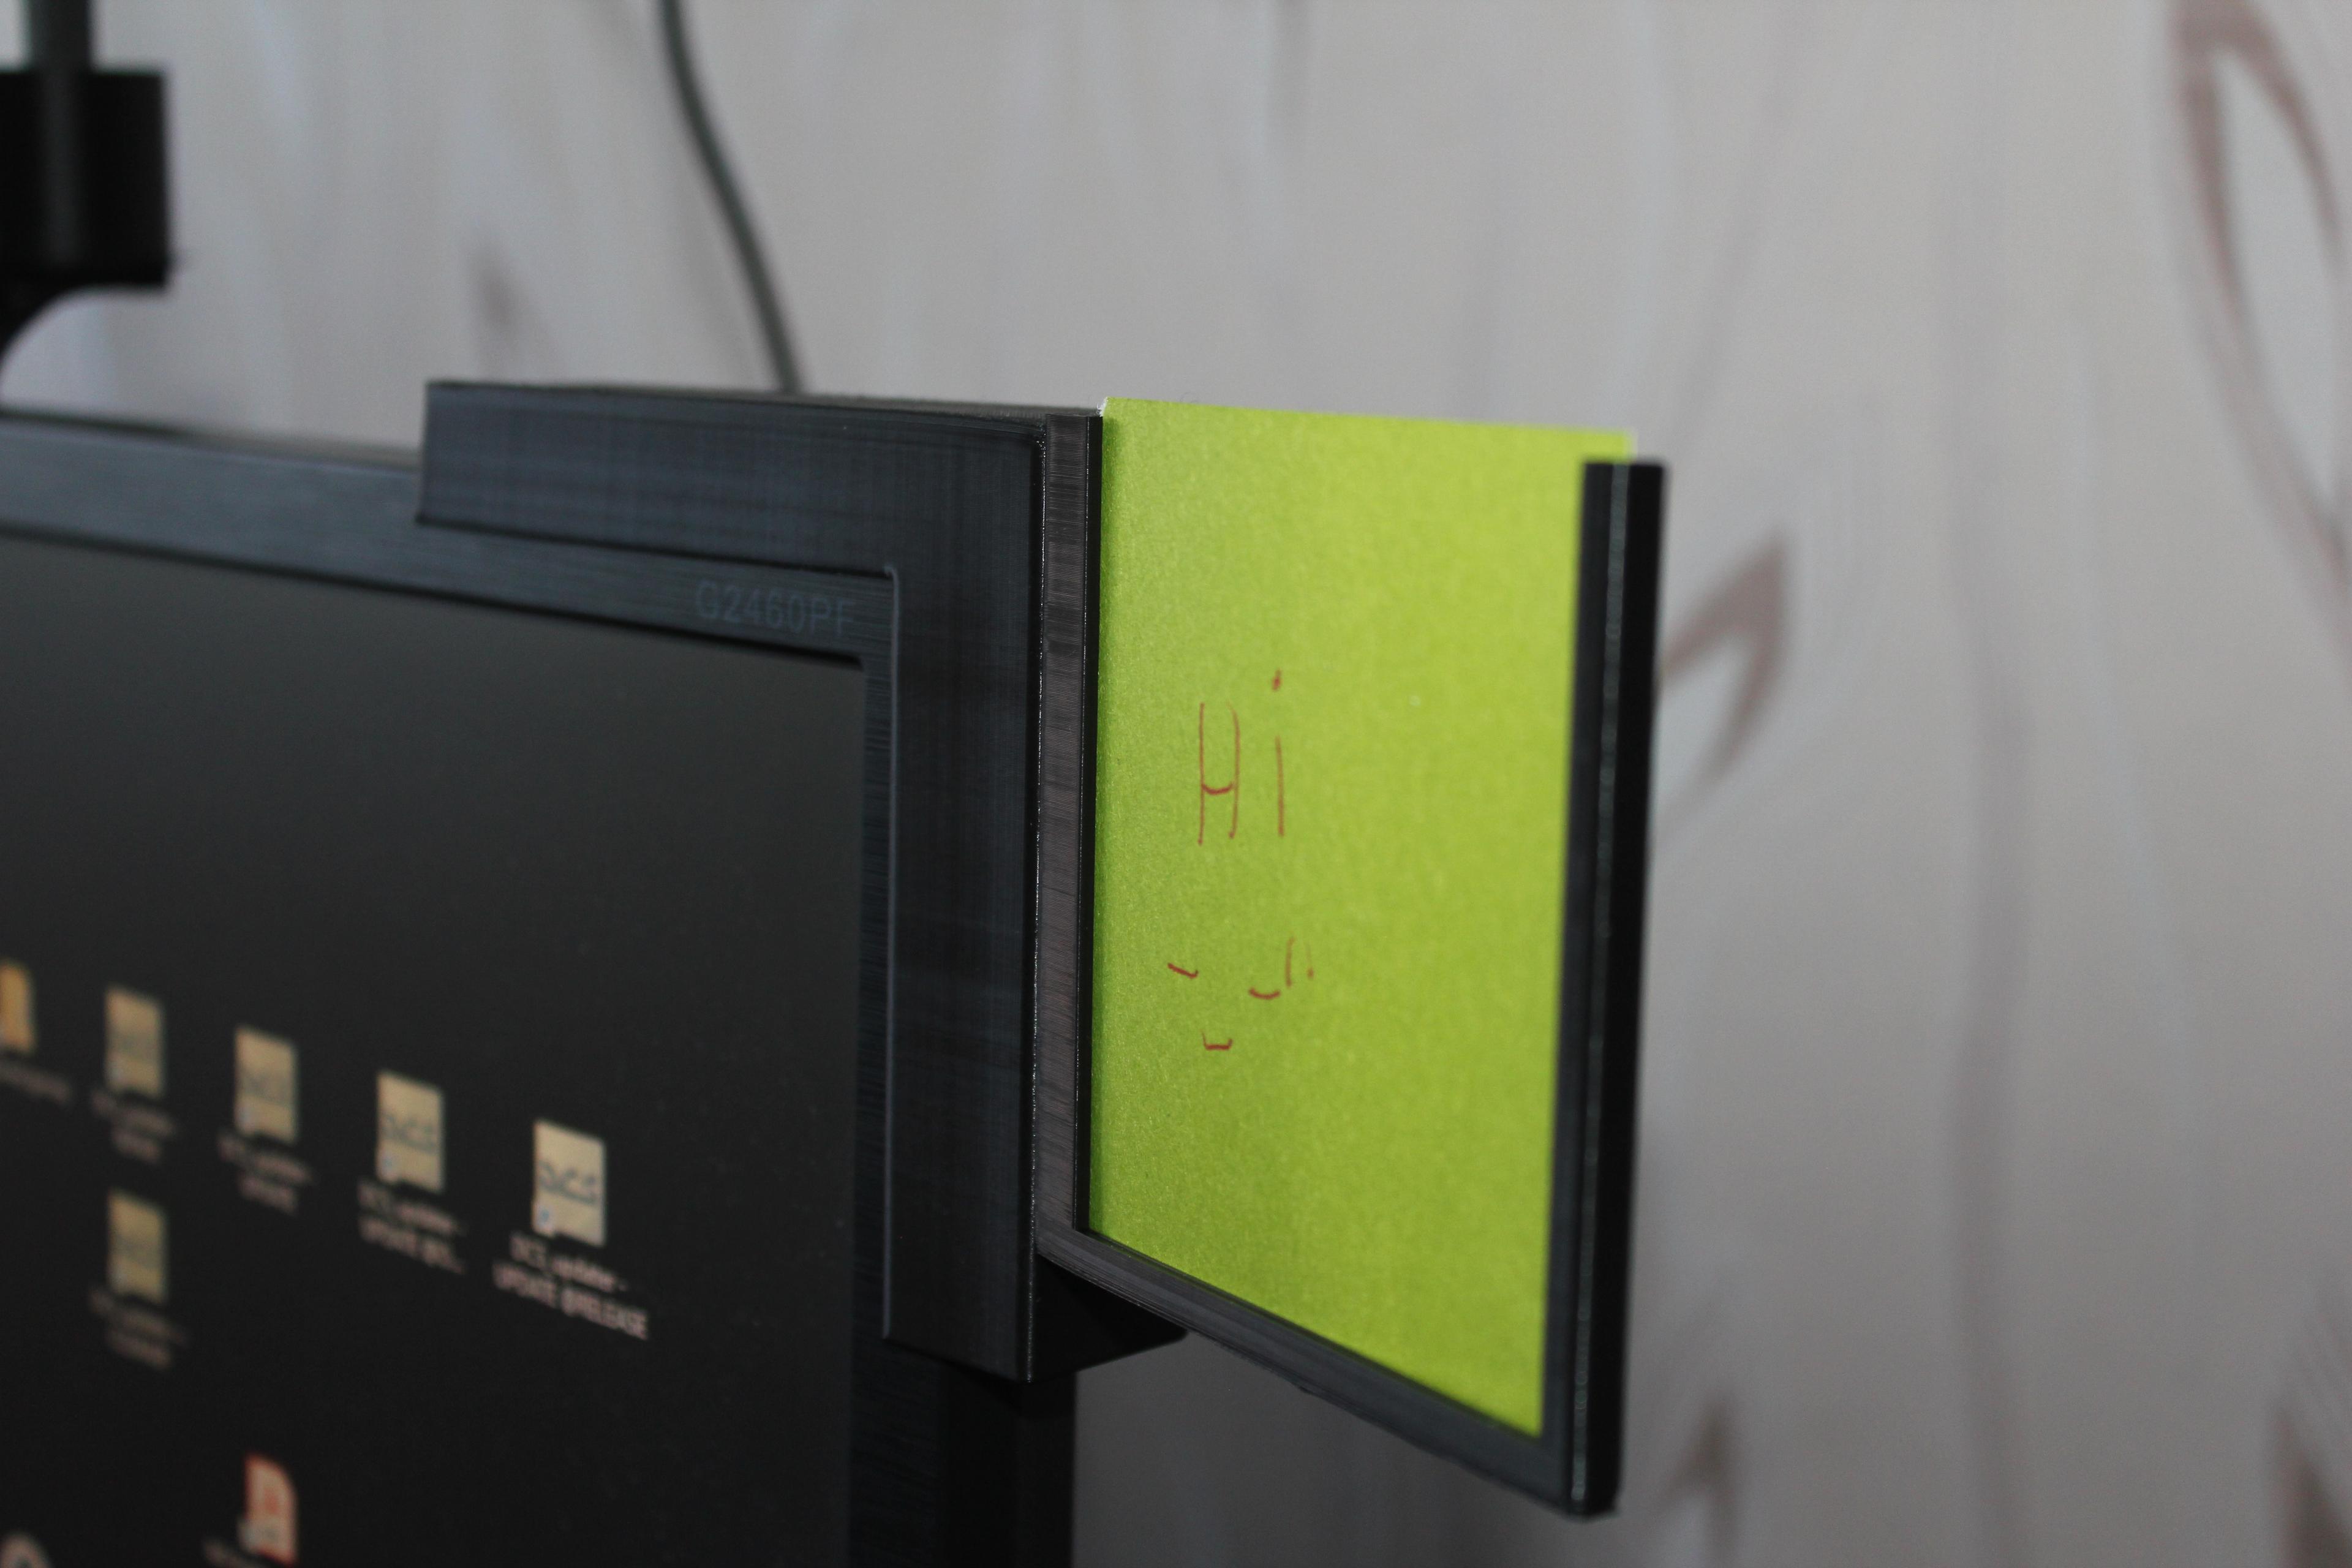 Basic note holder. - Prints just fine, fitment is tight due to backside curvature, good for what it does. - 3d model